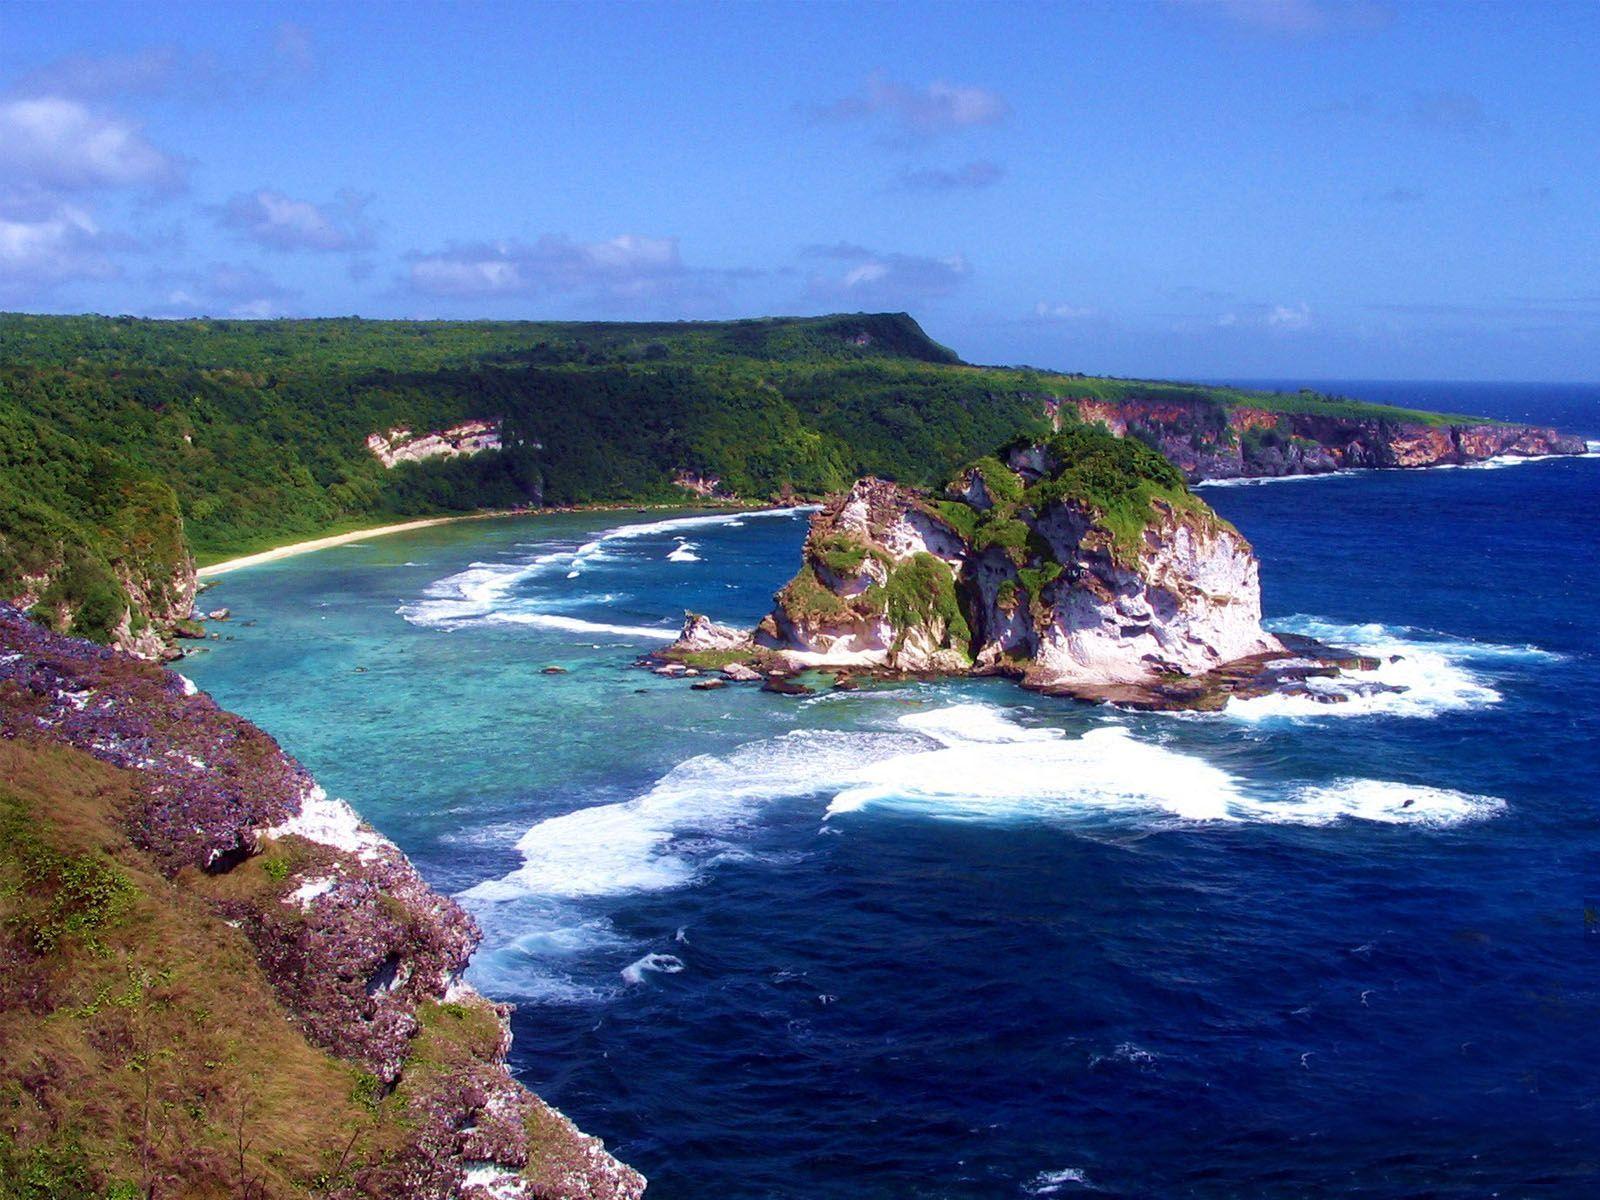 Northern Mariana Islands (Micronesia Pacific). pLaCeS tO gO